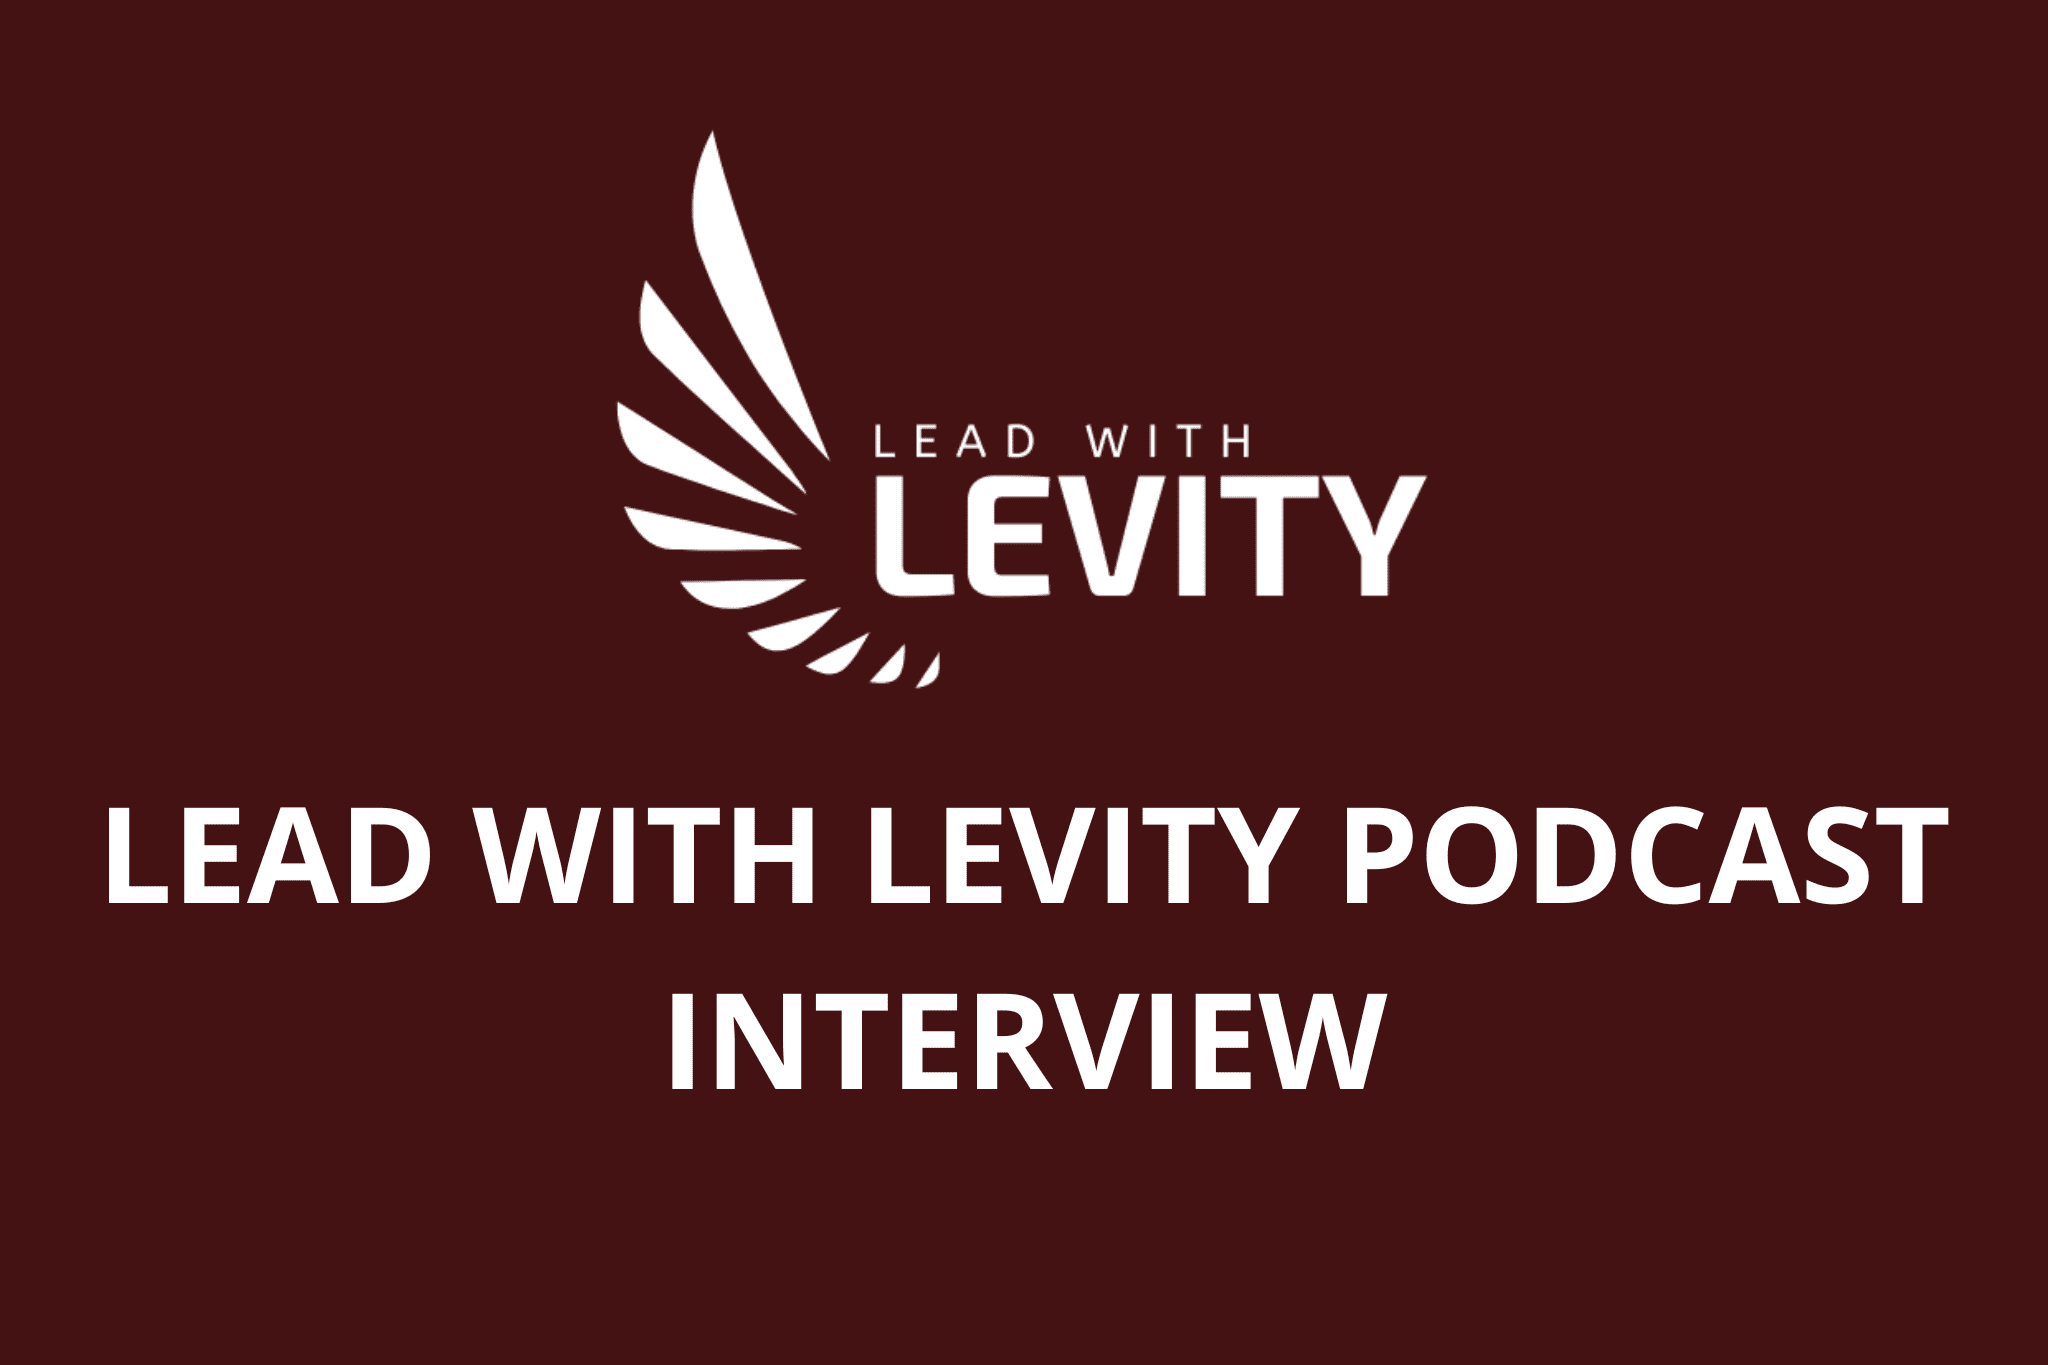 LEAD WITH LEVITY PODCAST INTERVIEW